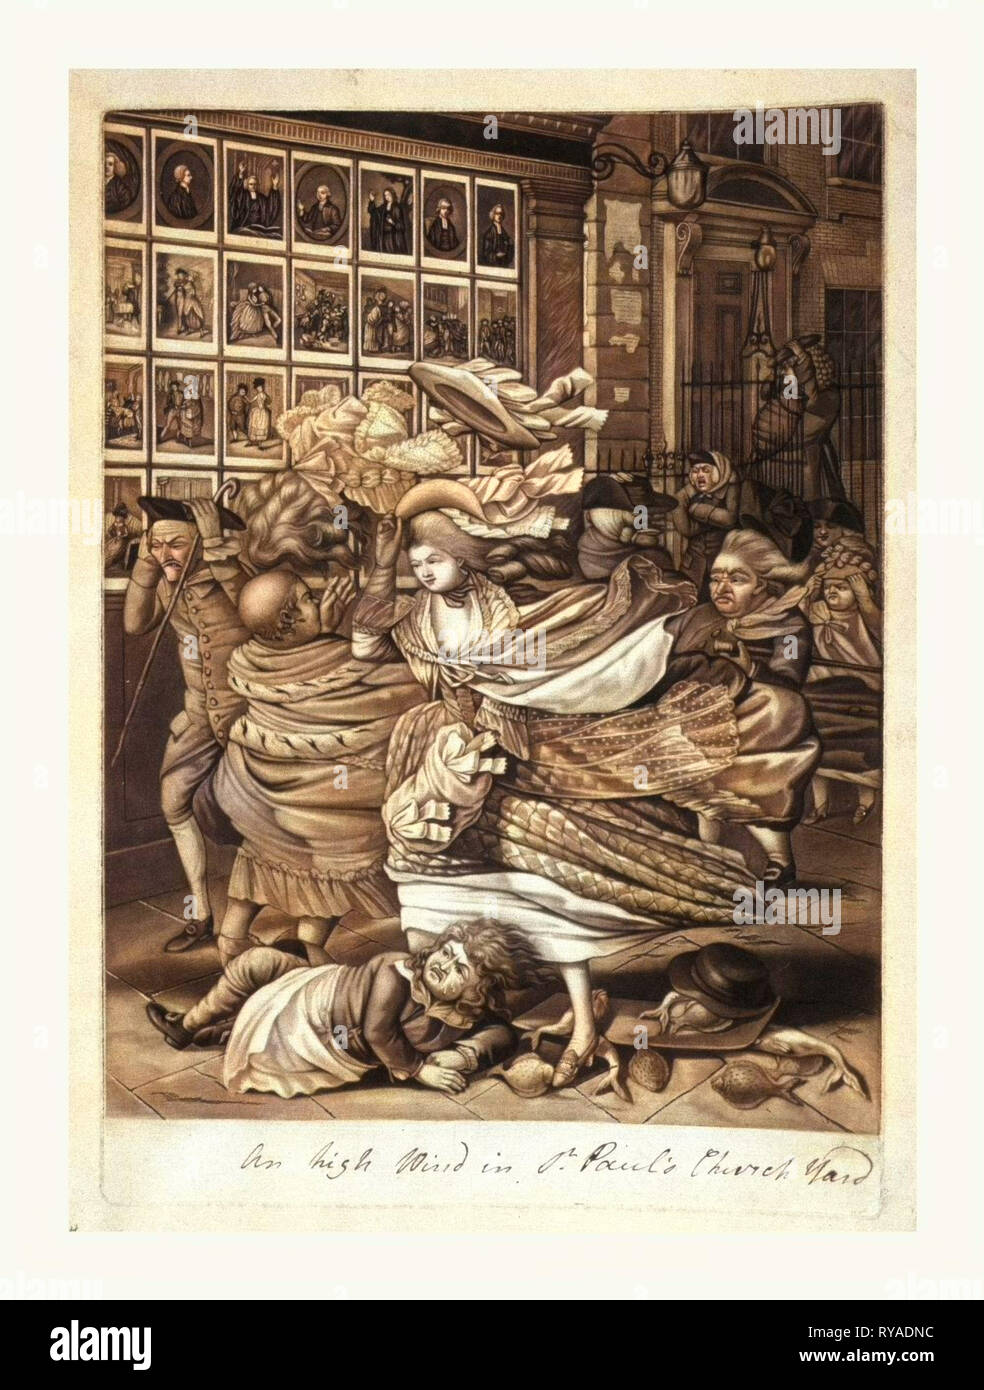 An High Wind in St. Paul's Church Yard, Artist, [1783], Mezzotint, Hand-Colored, a Street Scene Outside a Print Shop on a Windy Day As Pedestrians Struggle against the Force of the Wind Stock Photo